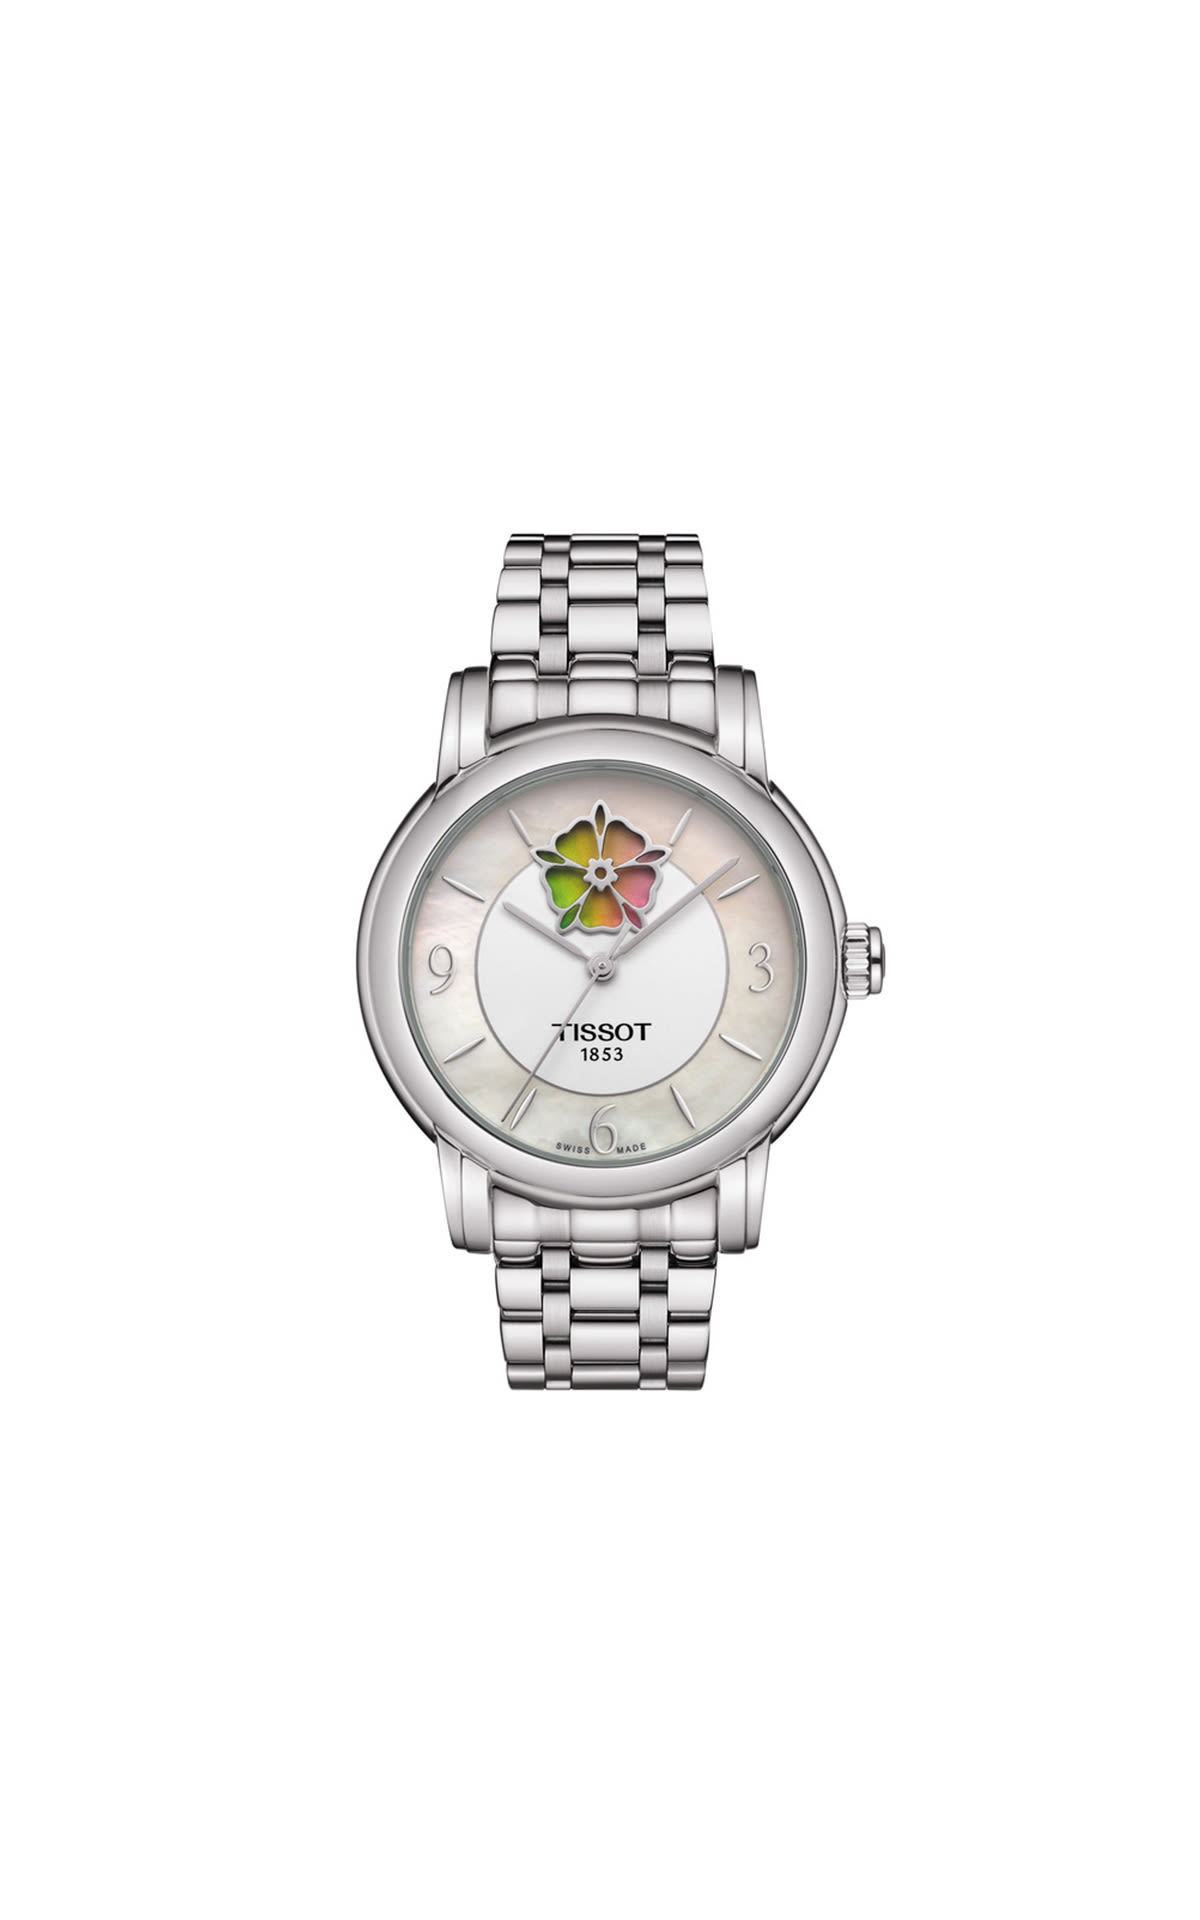 Tissot Lady Heart Auto Watch with changing flower La Vallée Village